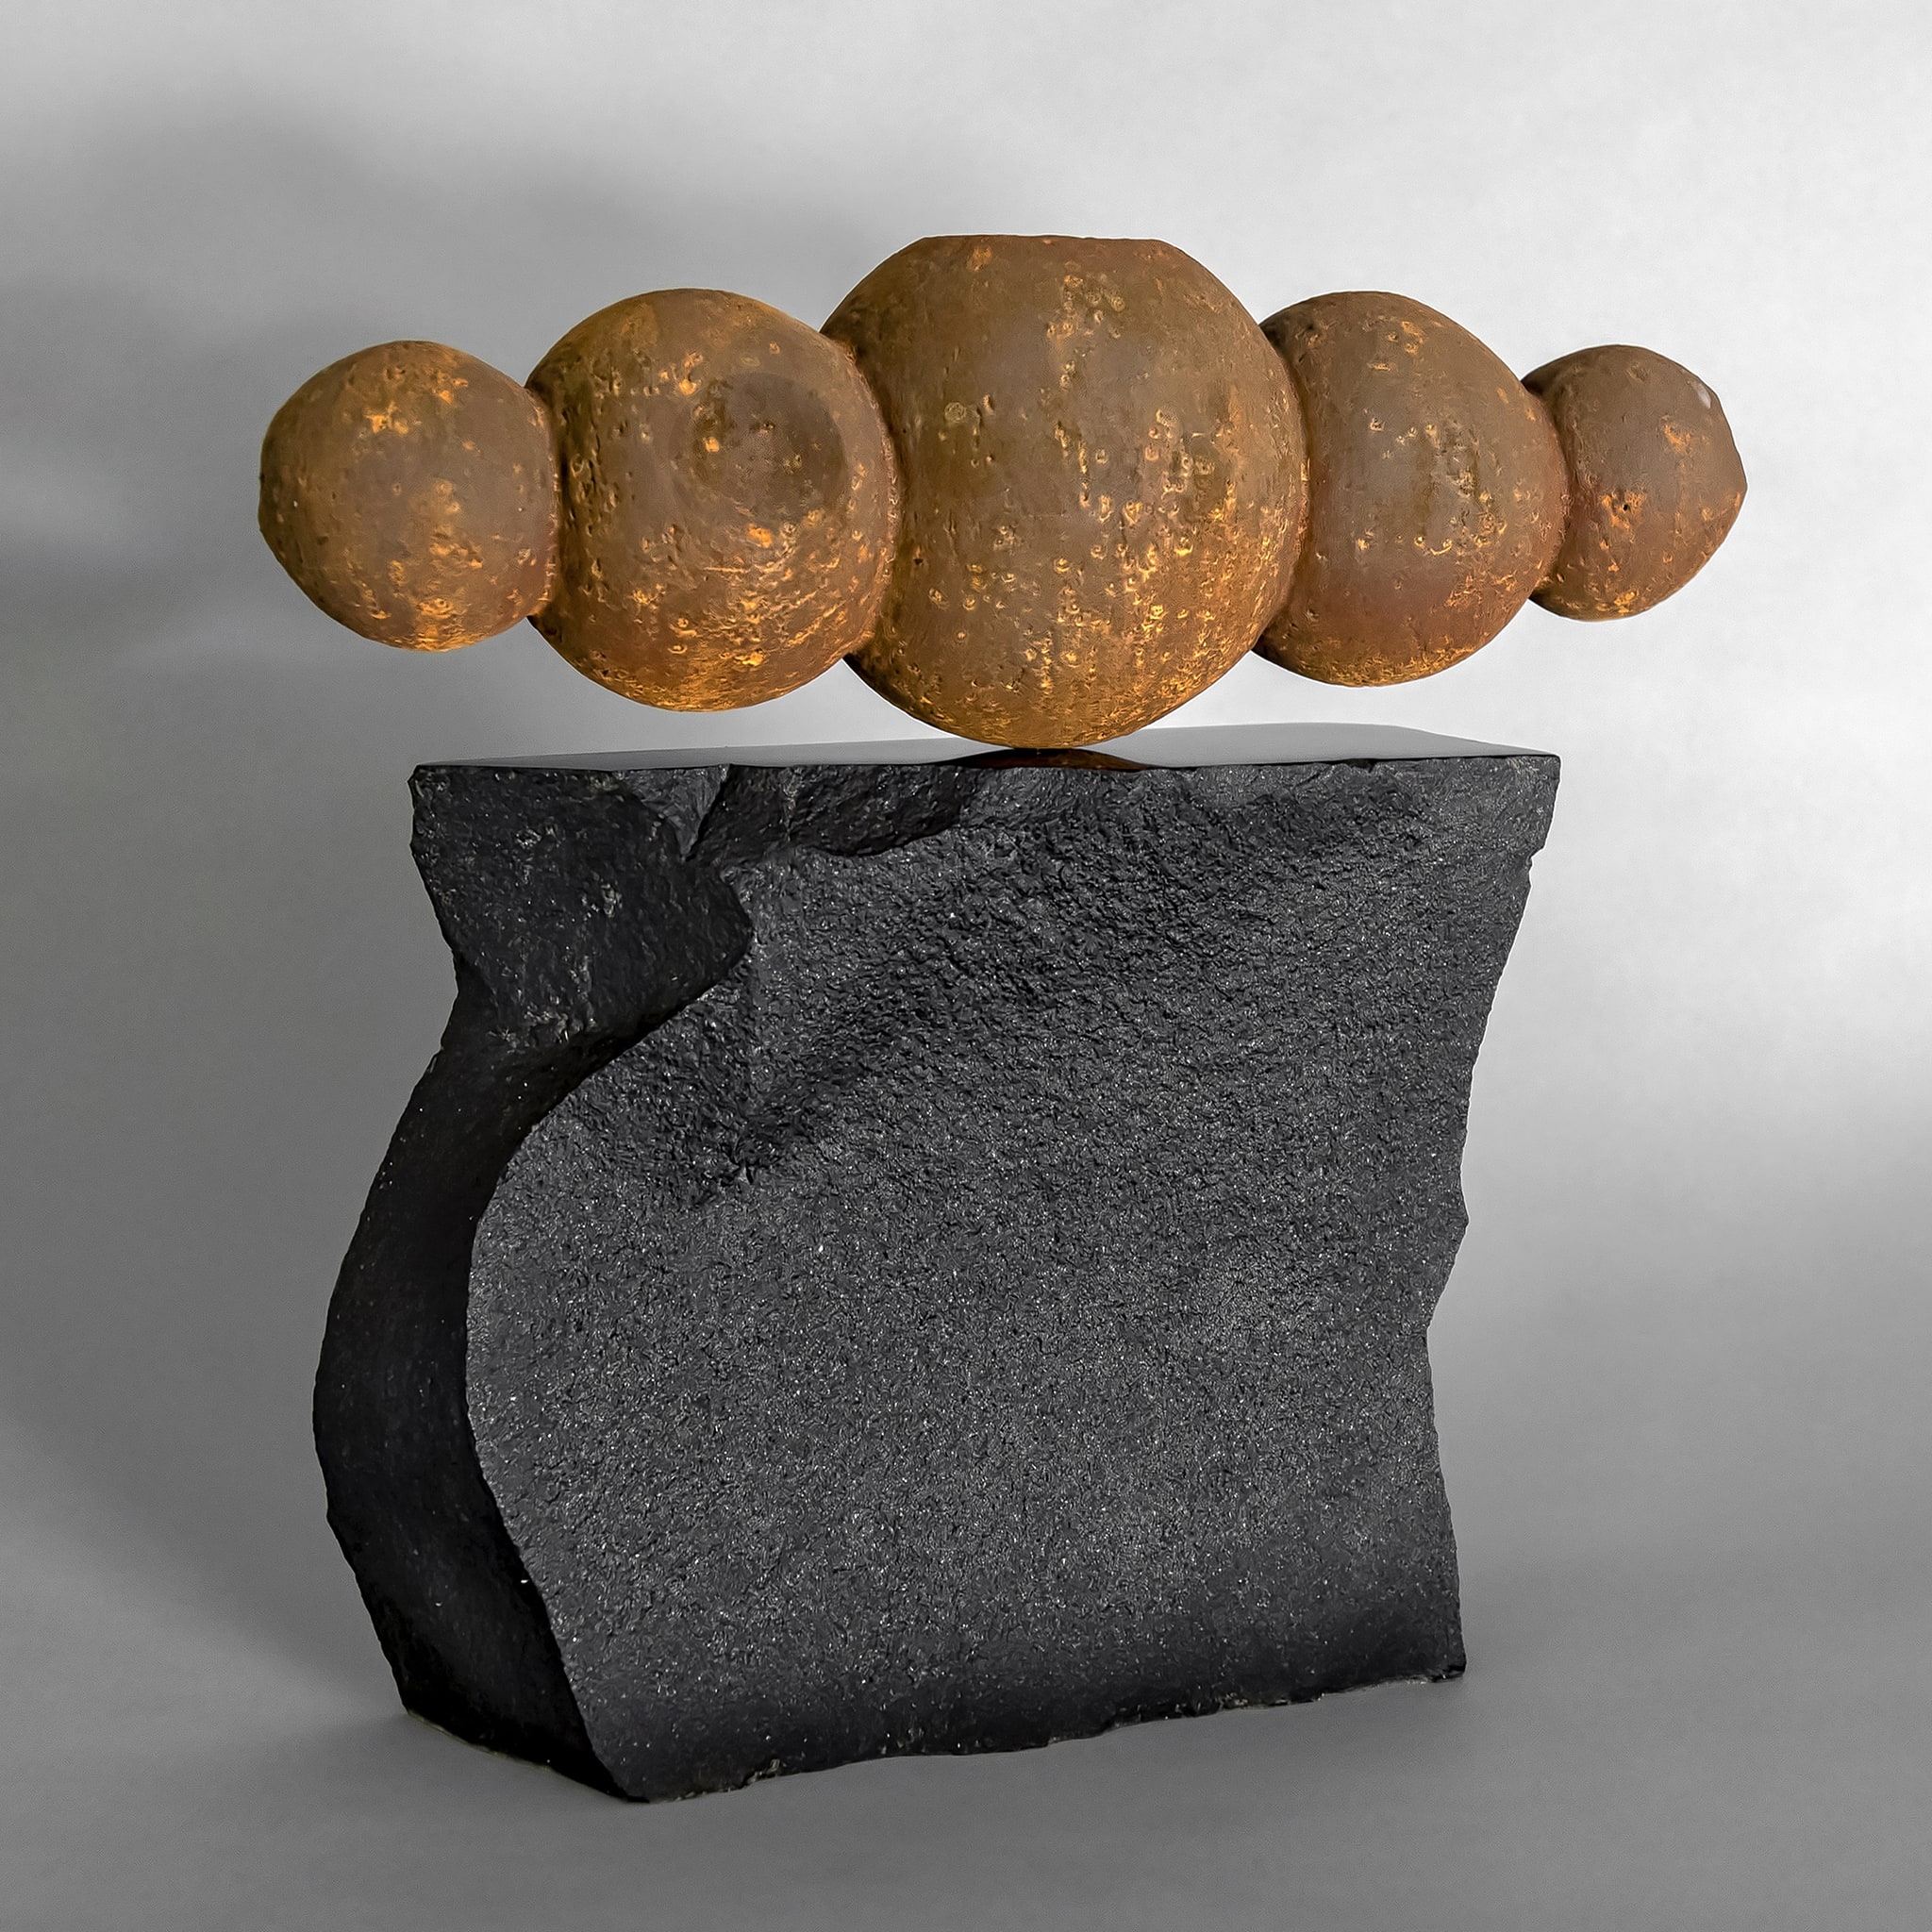 Geo Spheres, 12" x 13" x 4", clay with iron oxide finish on black basalt